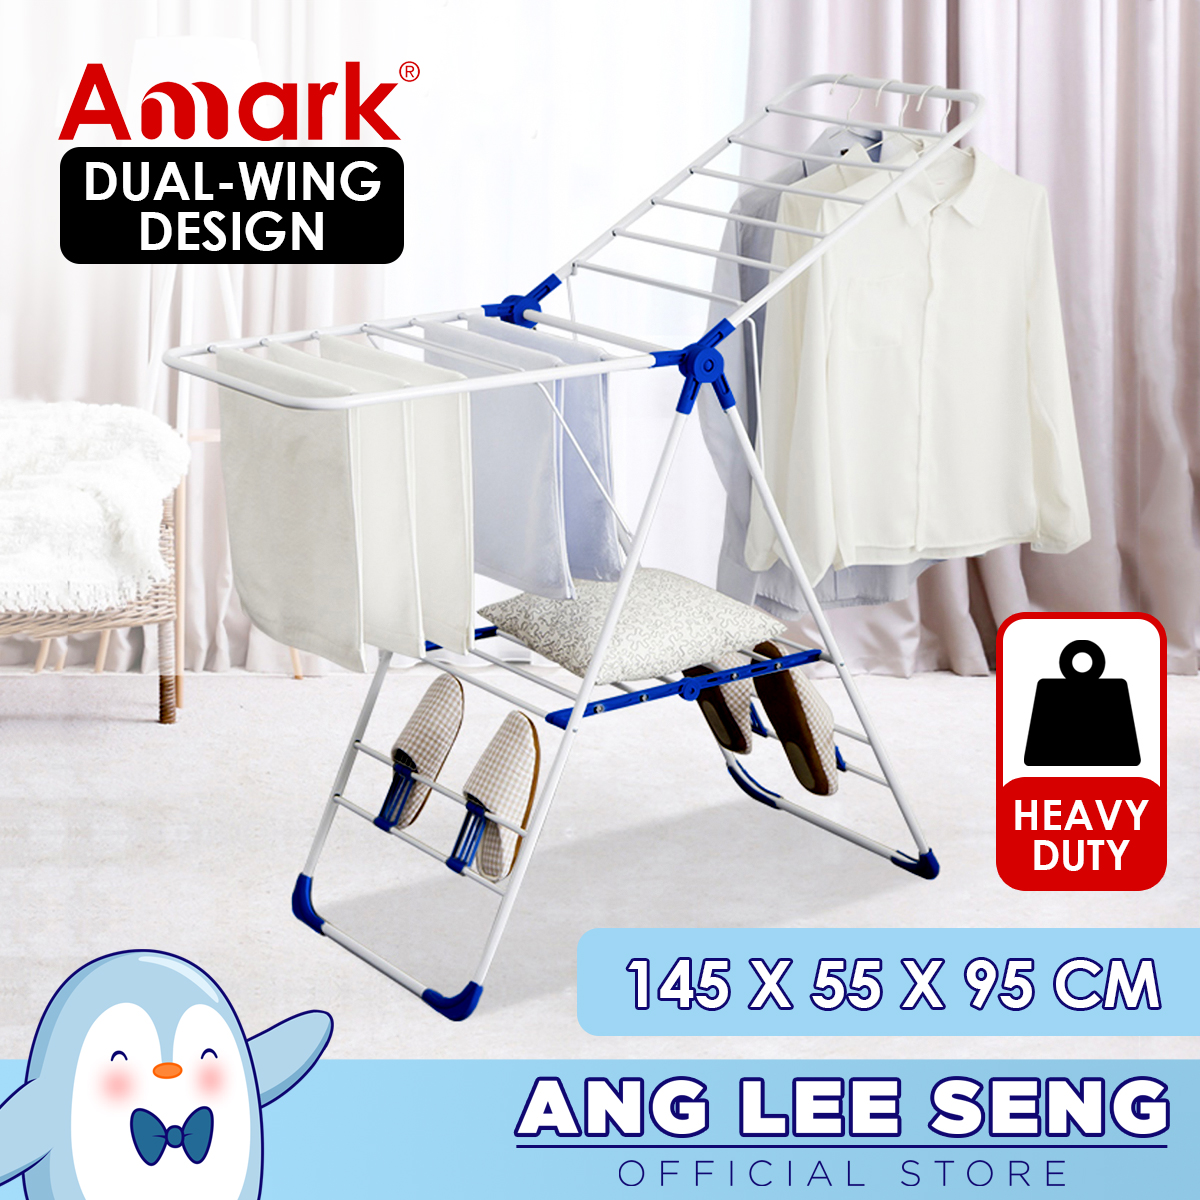 Amark Heavy-Duty Epoxy Steel Dual-Wing Clothes Dryer with Shoe Holders 145x55x95 cm